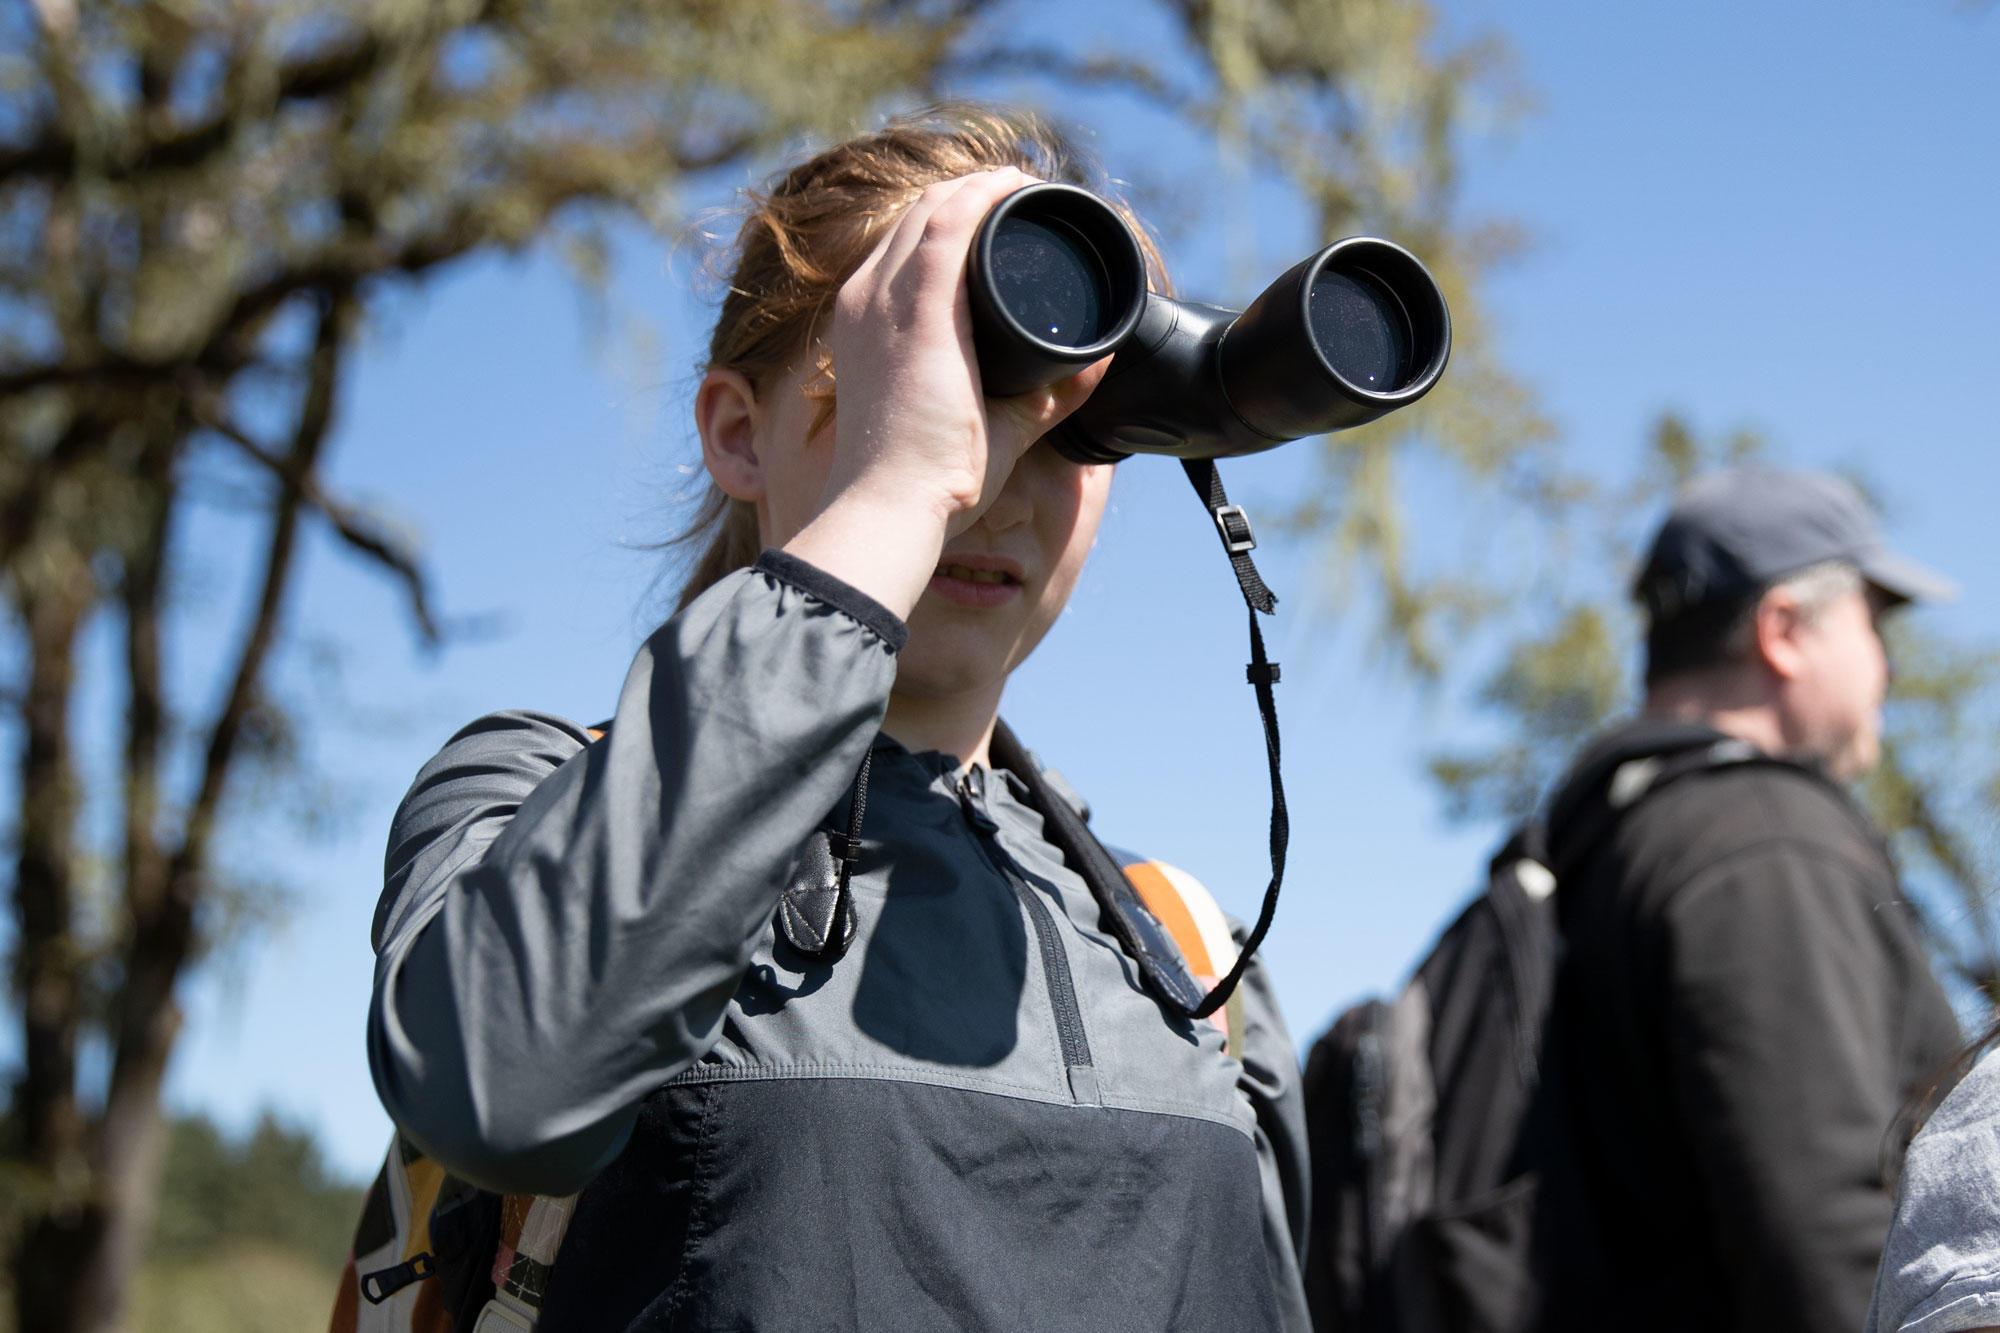 Birdwatching is another way to get kids involved in an outdoor activity.